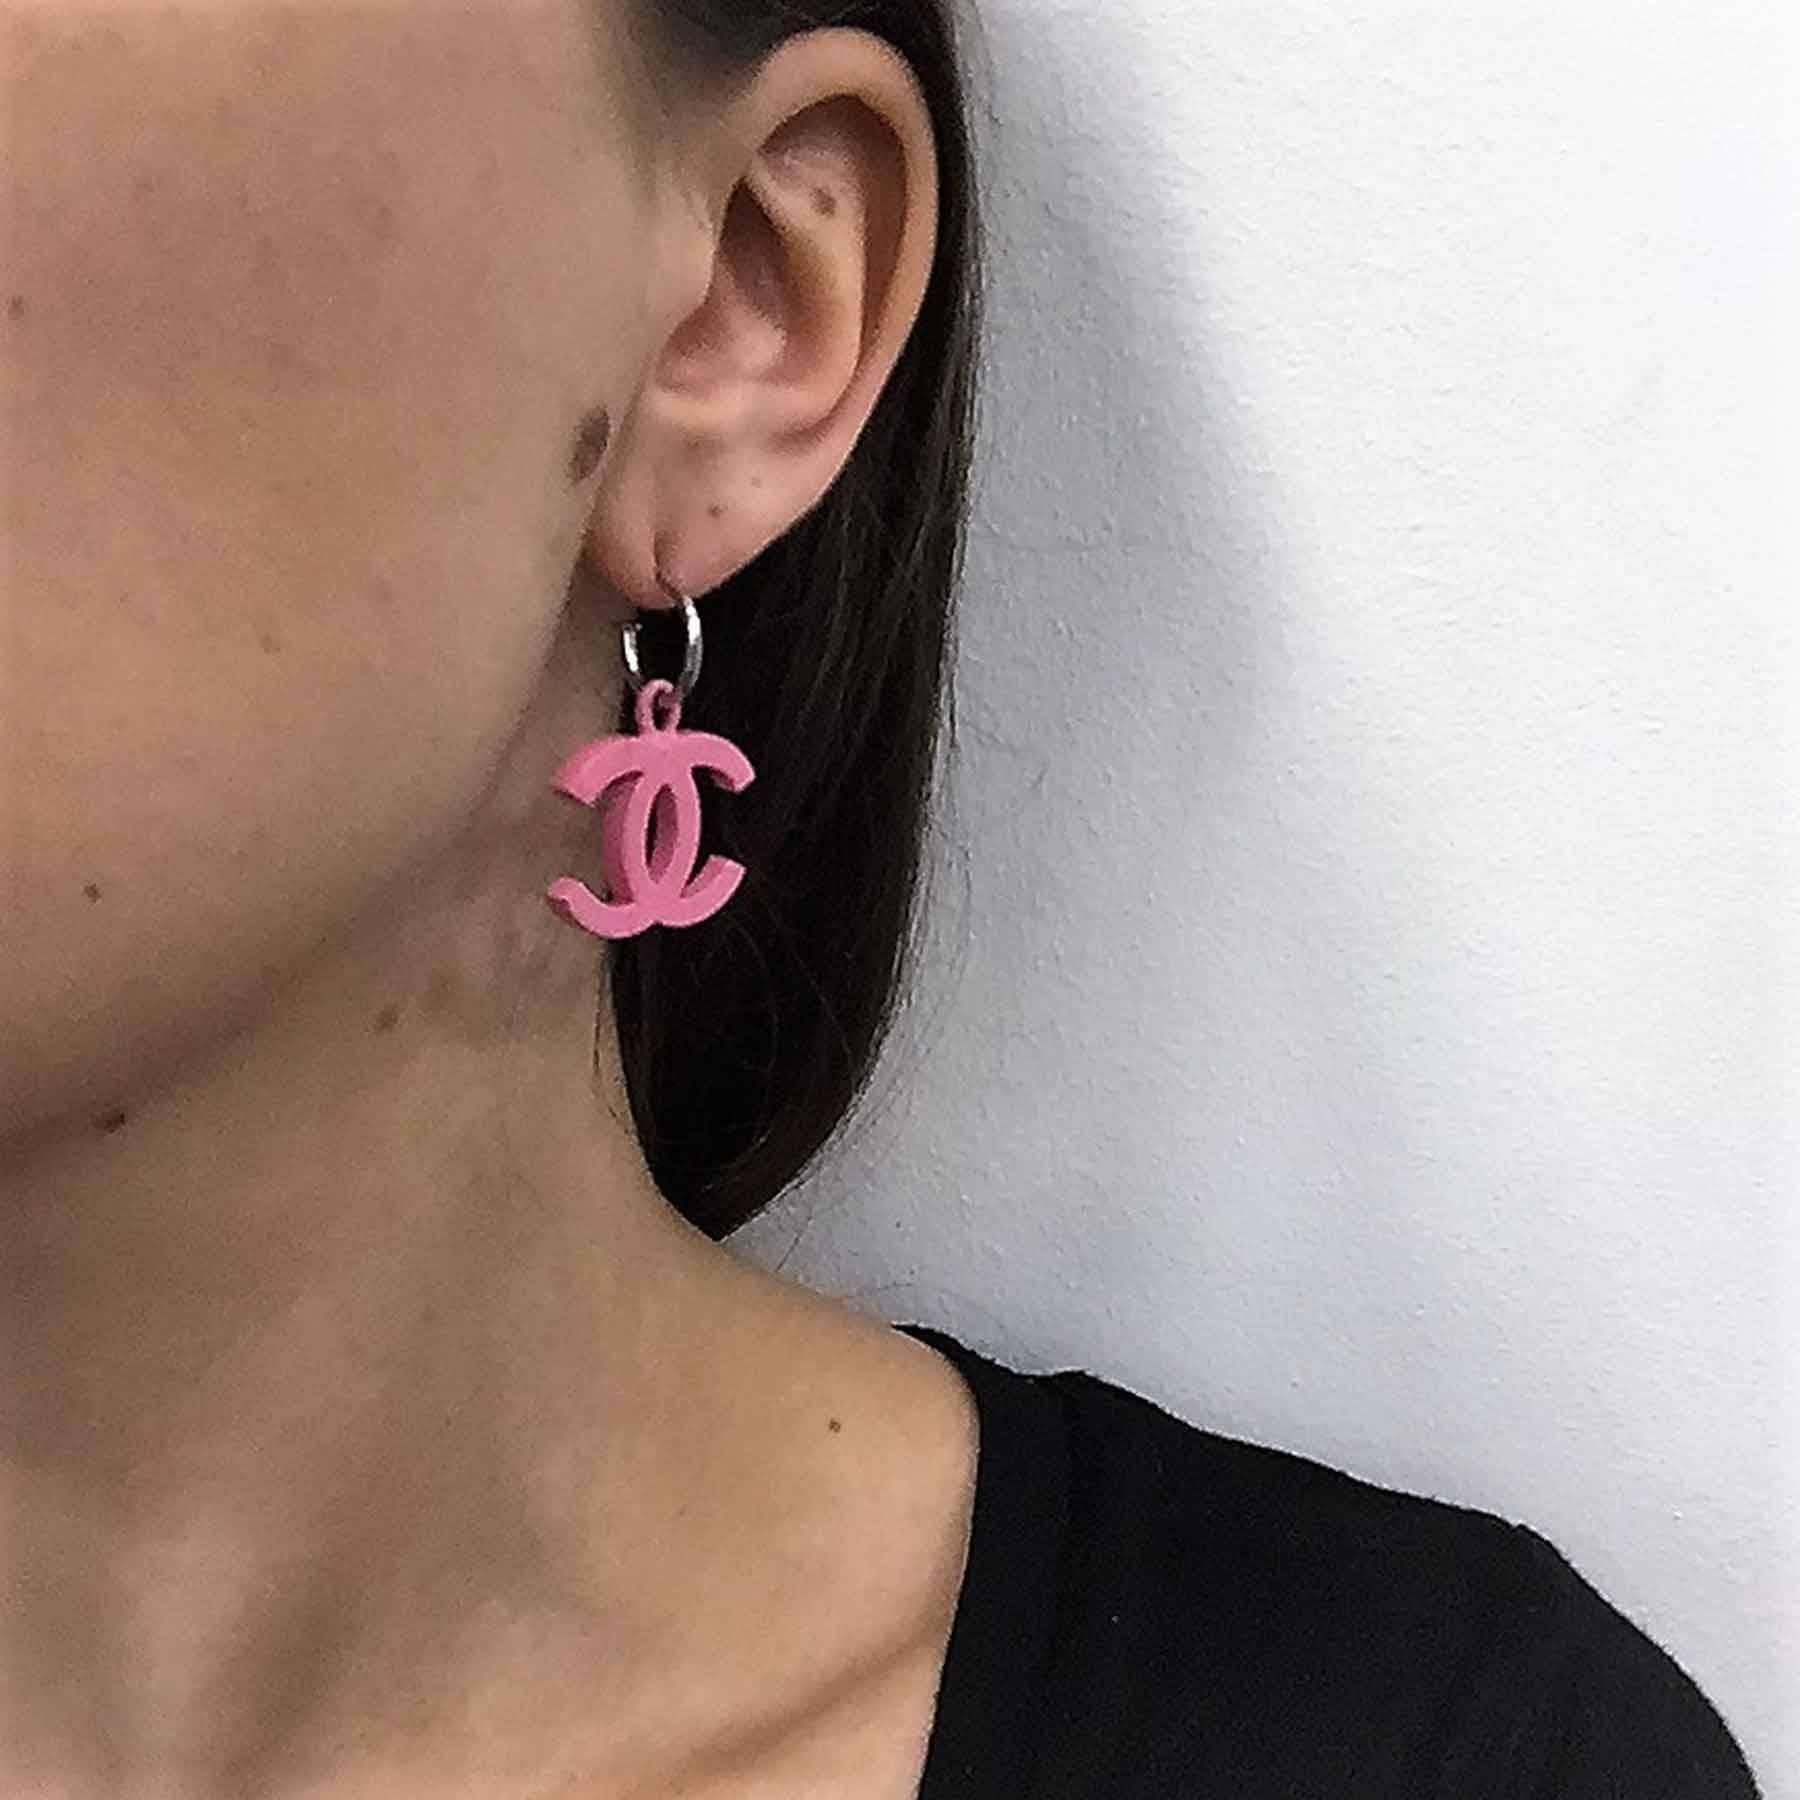 Chanel stud earrings in enameled pink metal. 

Collection 2003

Will be delivered in a Valois Vintage Paris Dustbag